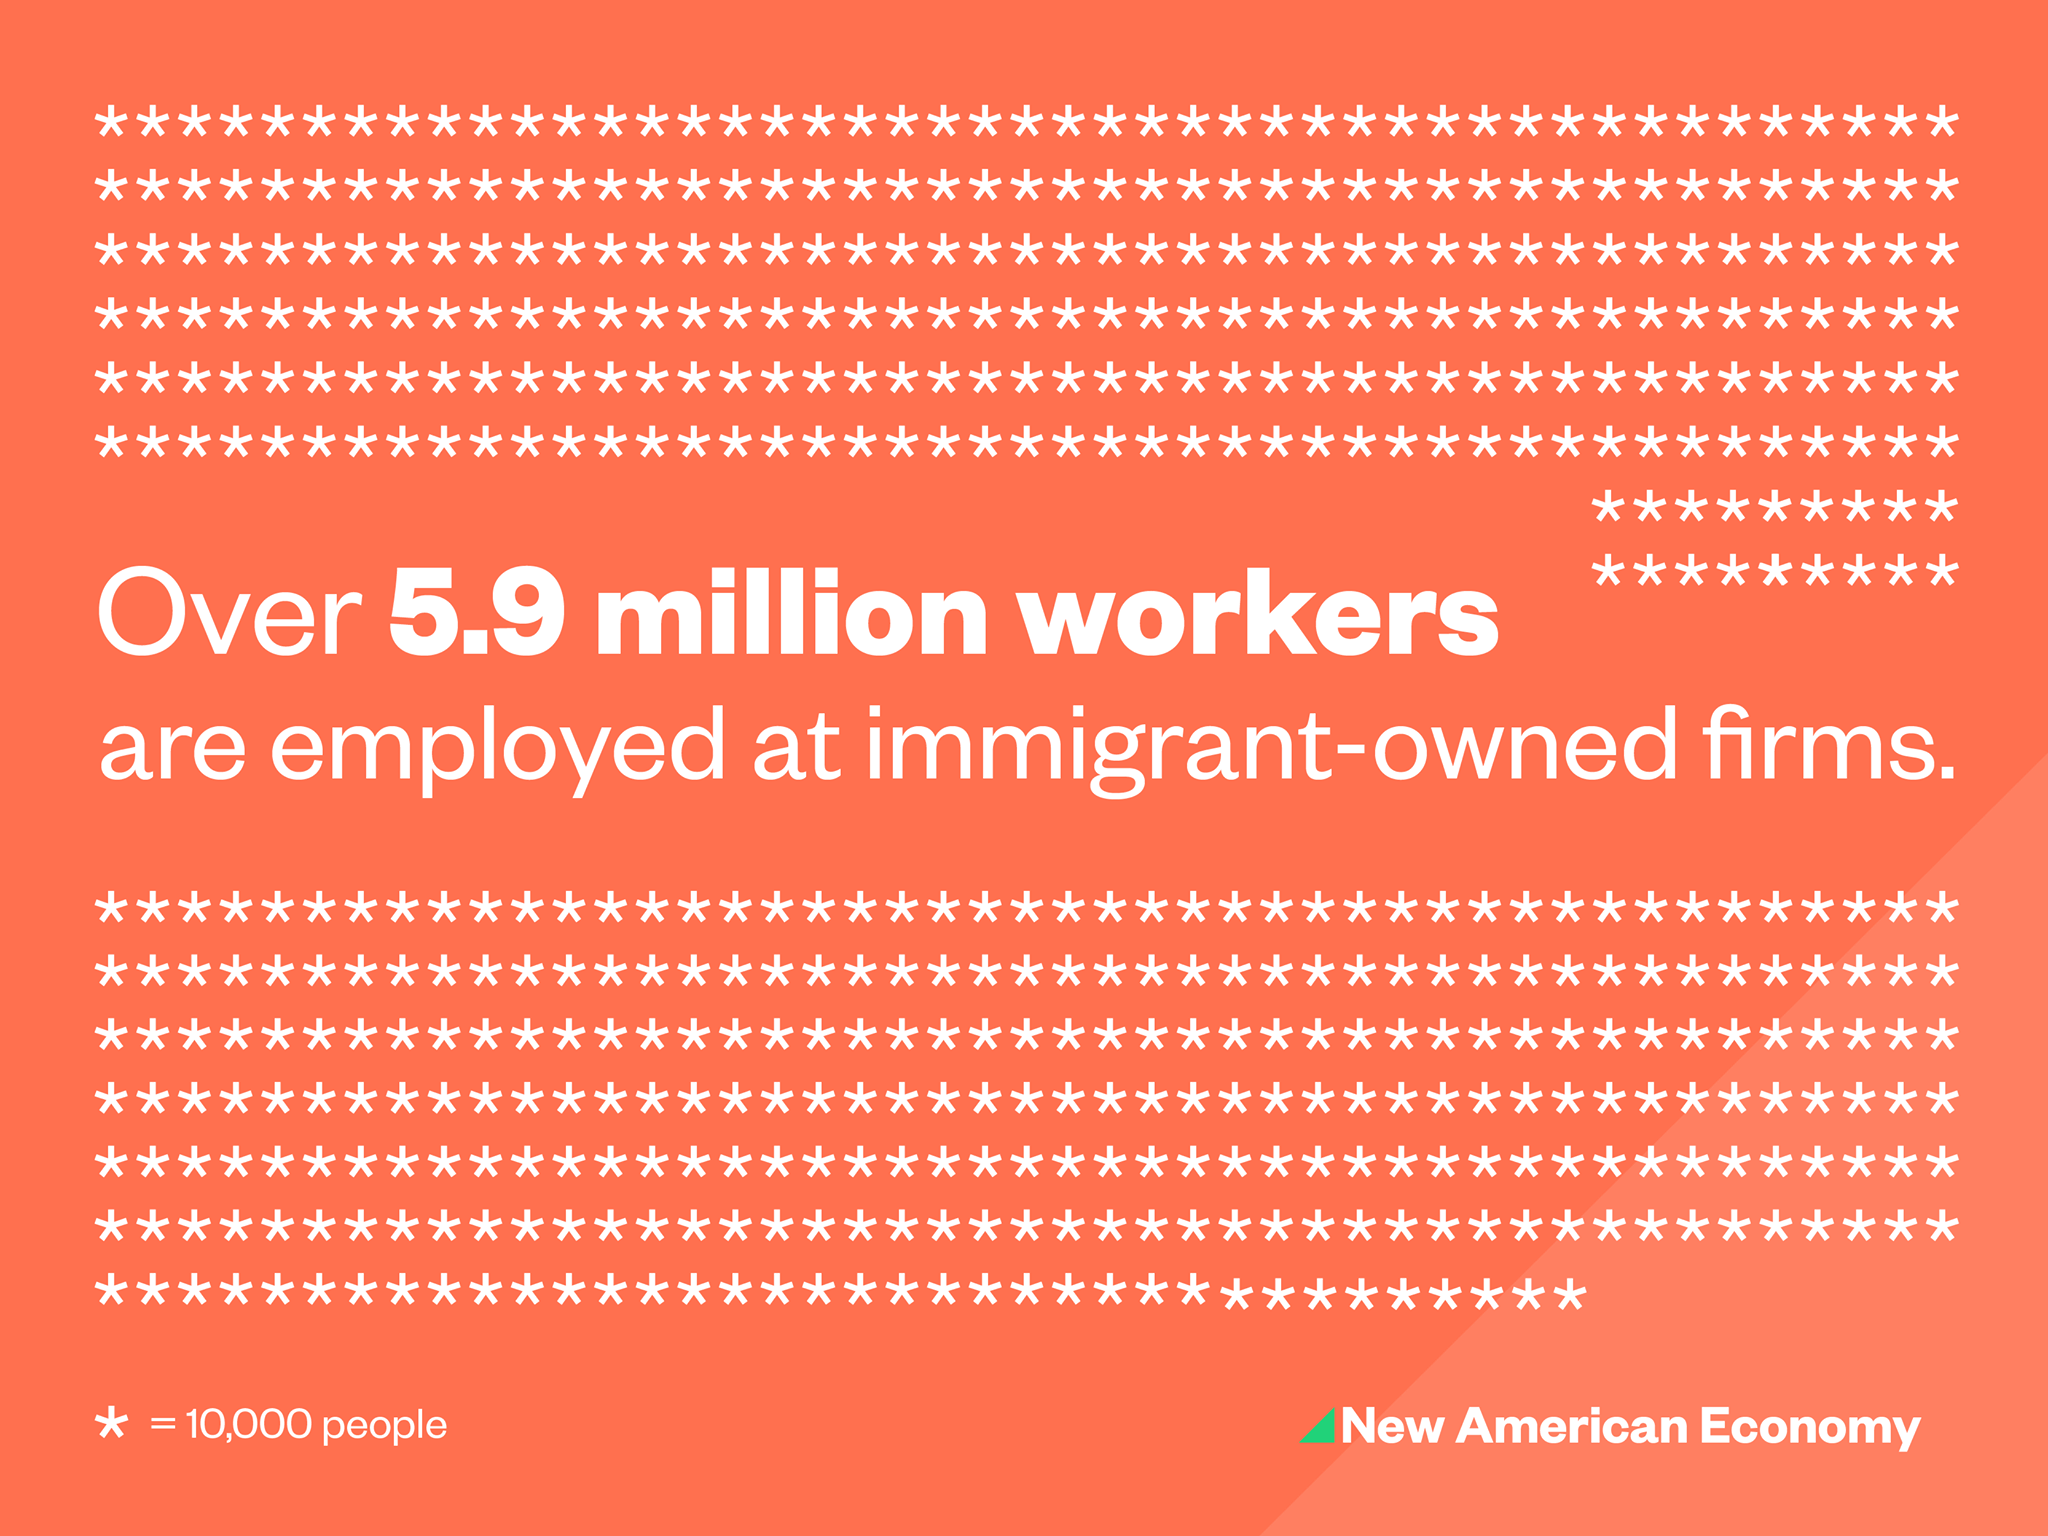 Over 5.9 million workers are employed at immigrant-owned firms.